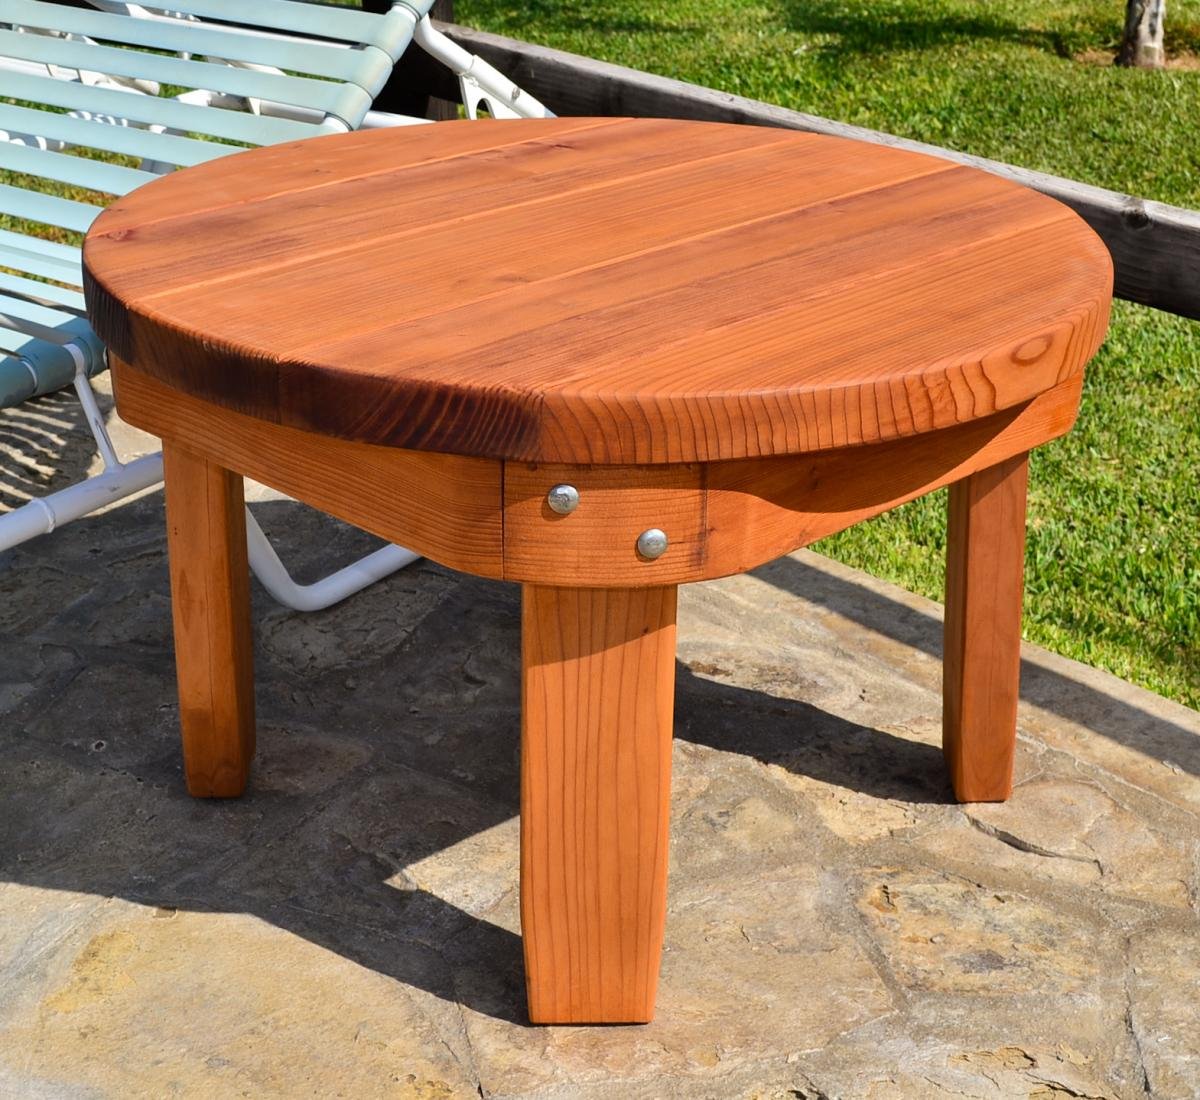 solid wood side table classic redwood round options size mature transparent premium sealant rounded apron outdoor west elm acorn living room lounge chair ikea pot rack nautical